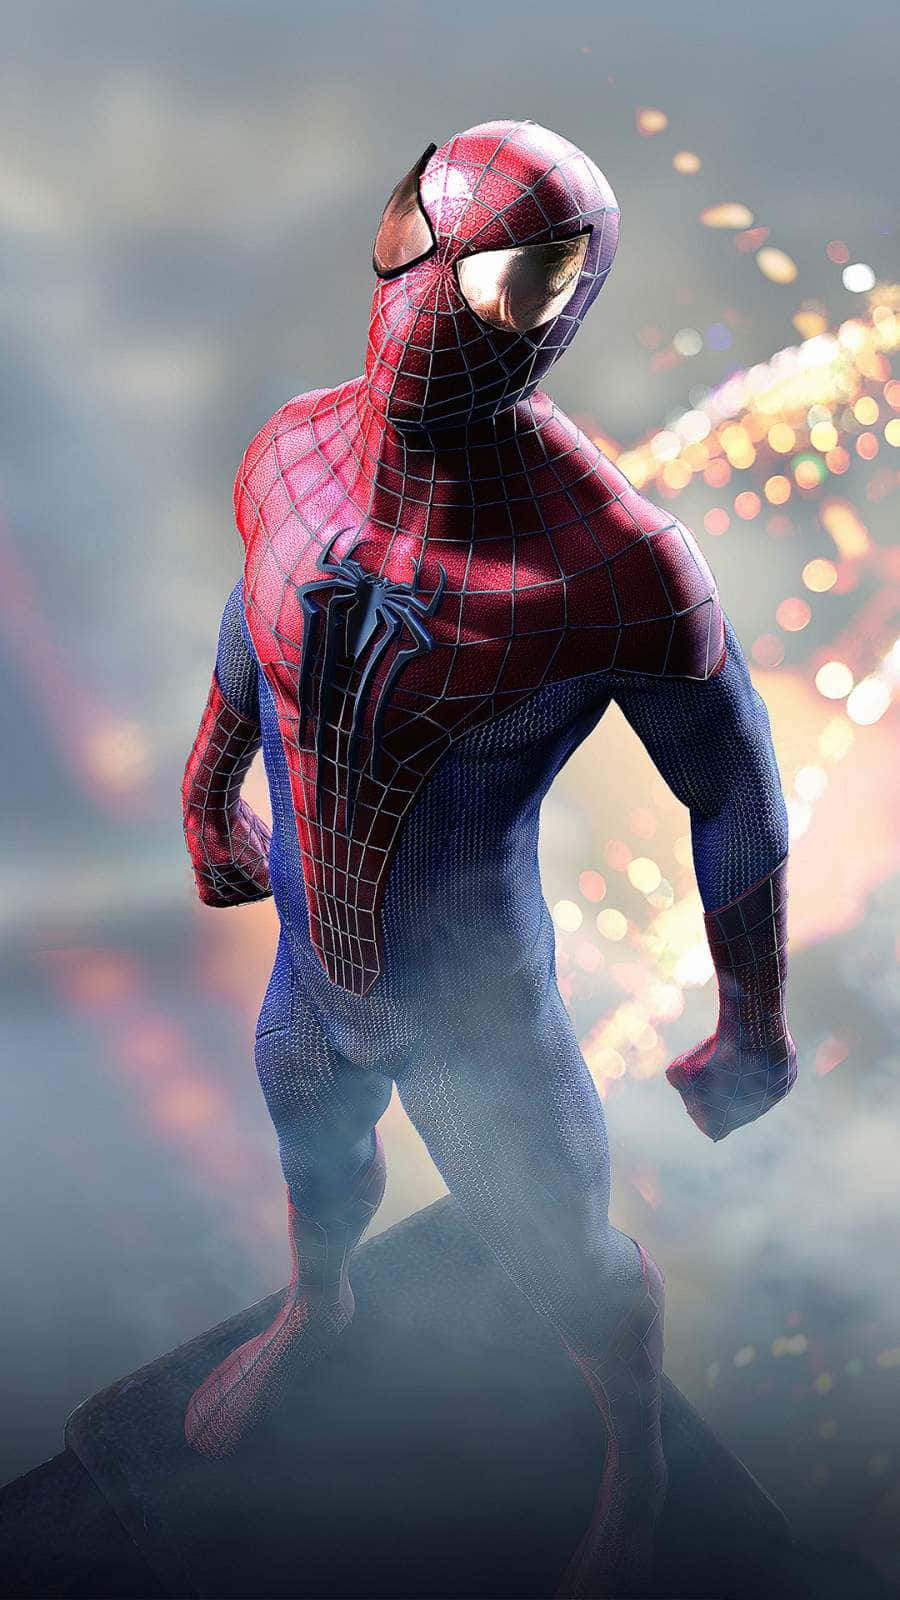 Get the Amazing Spider Man theme on your iPhone! Wallpaper